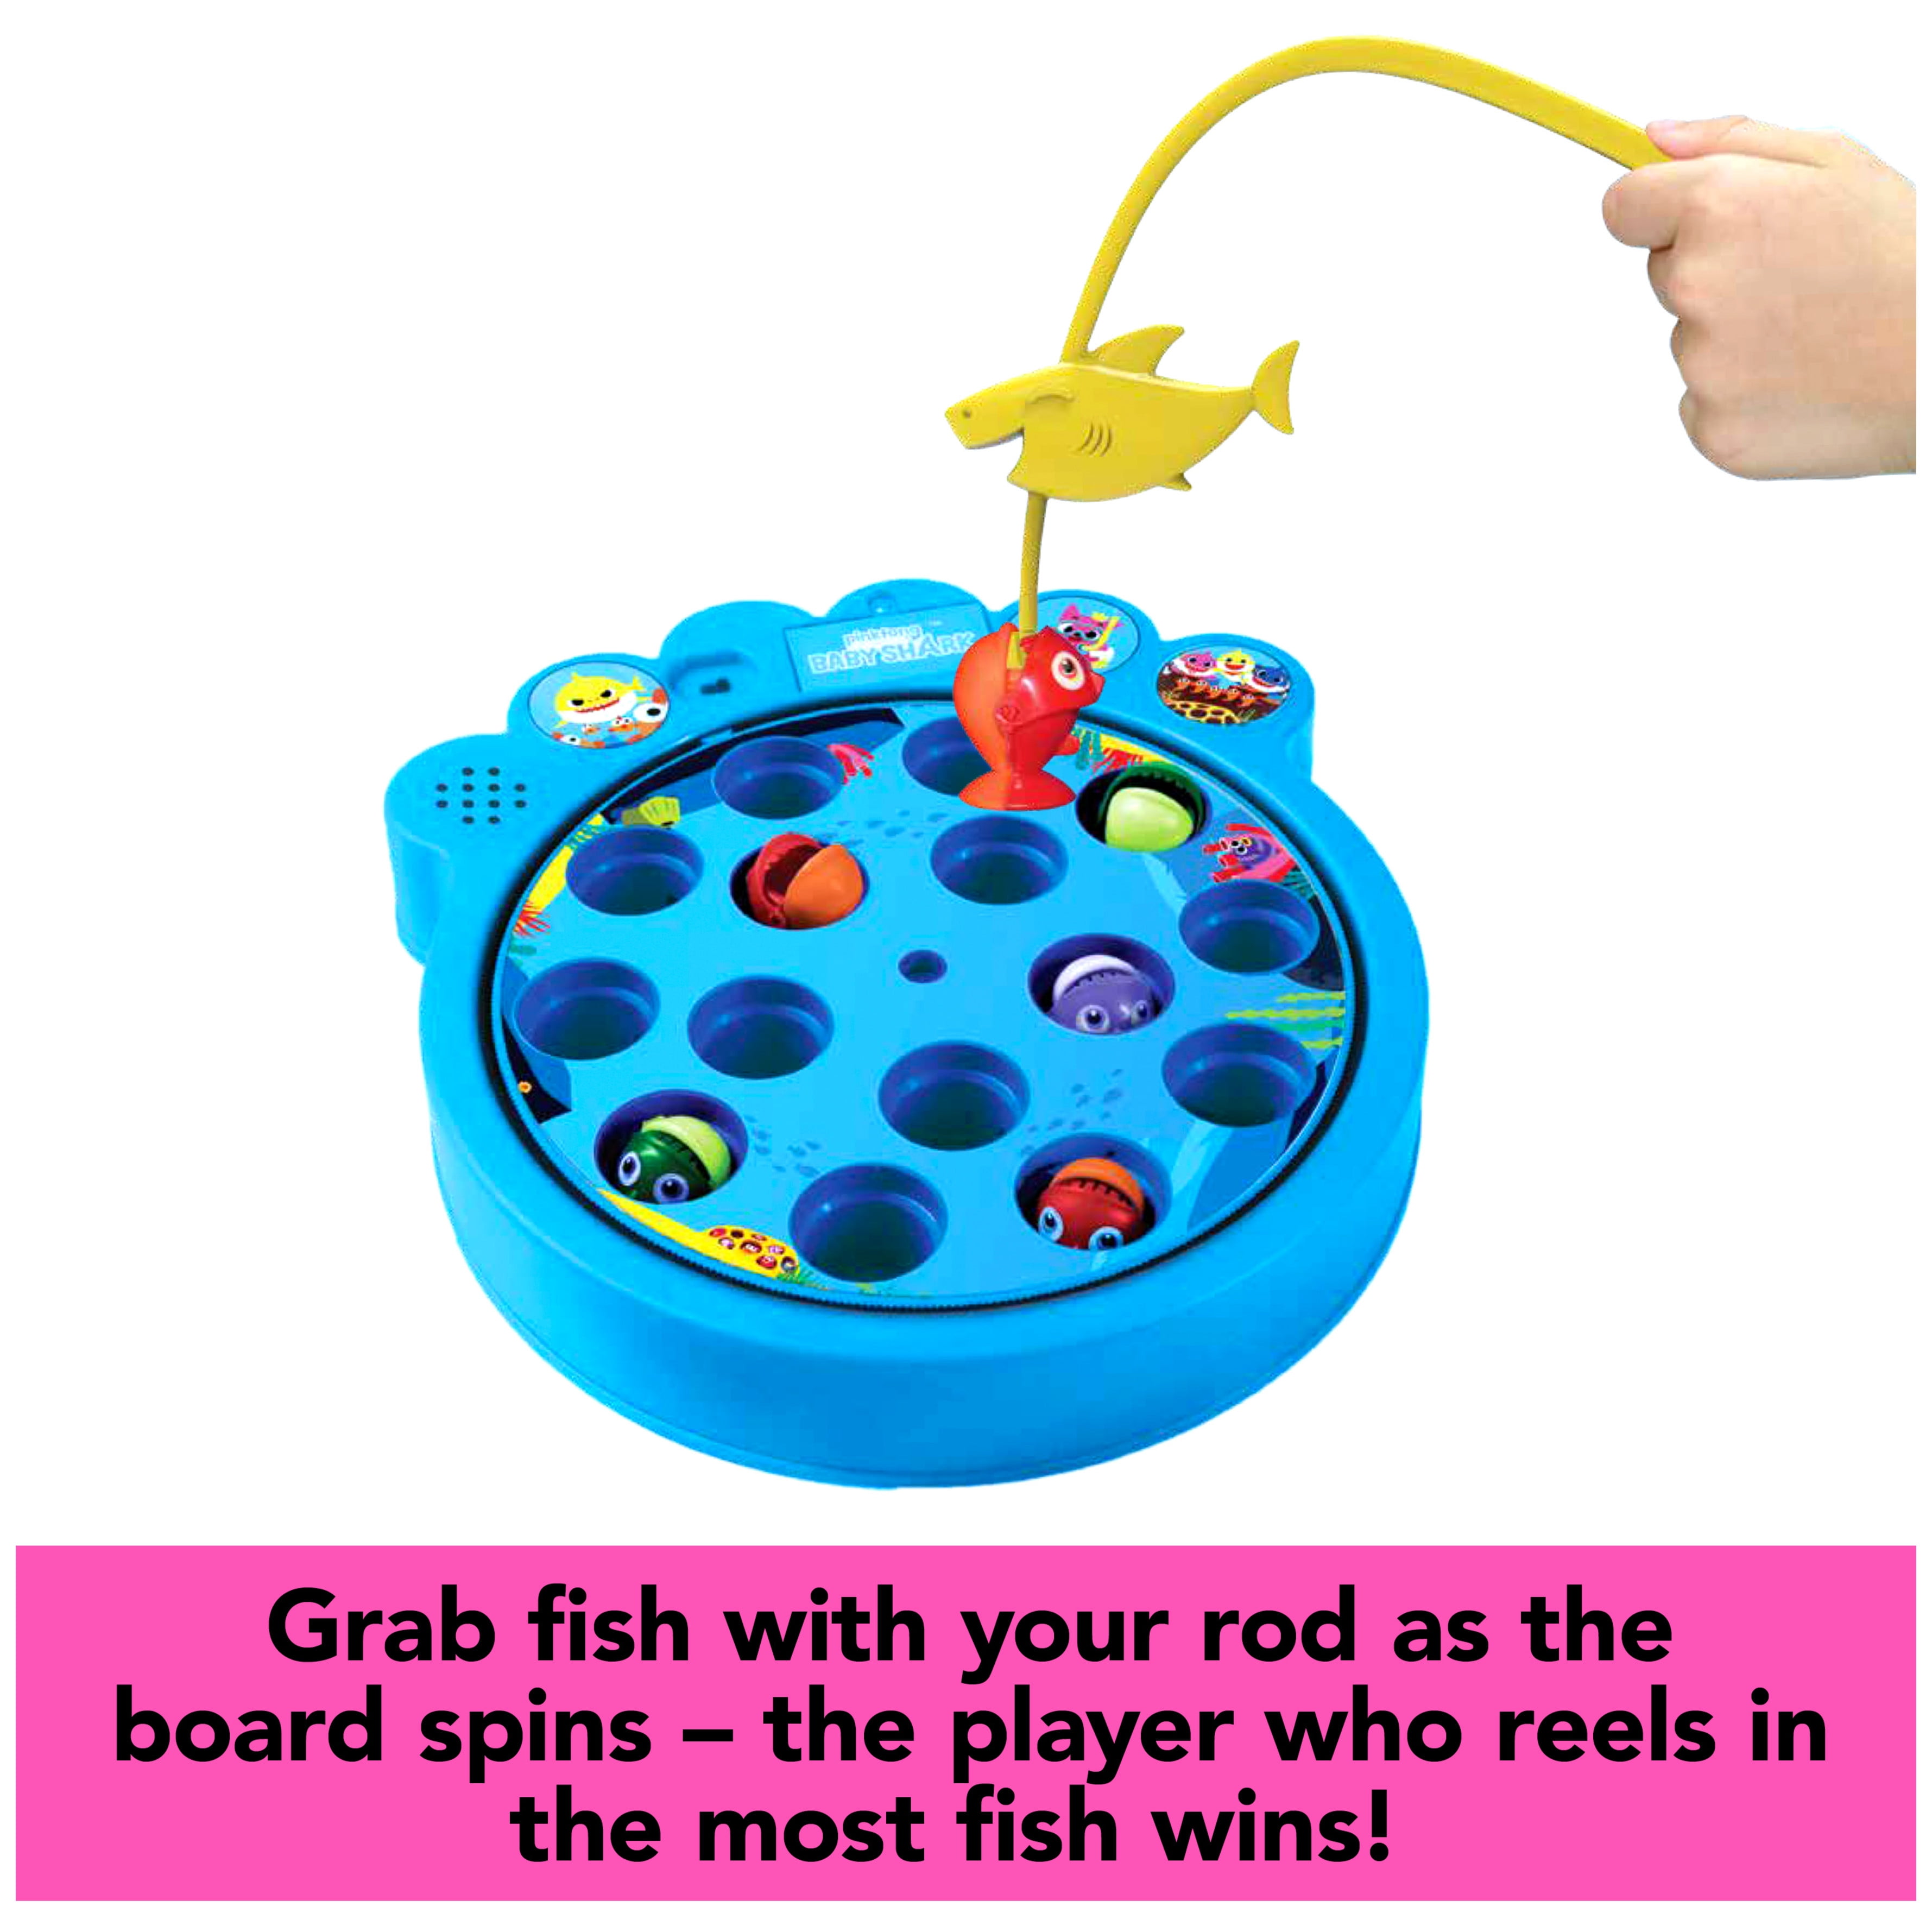 Pinkfong Baby Shark Let's Go Hunt Musical Fishing Game, for